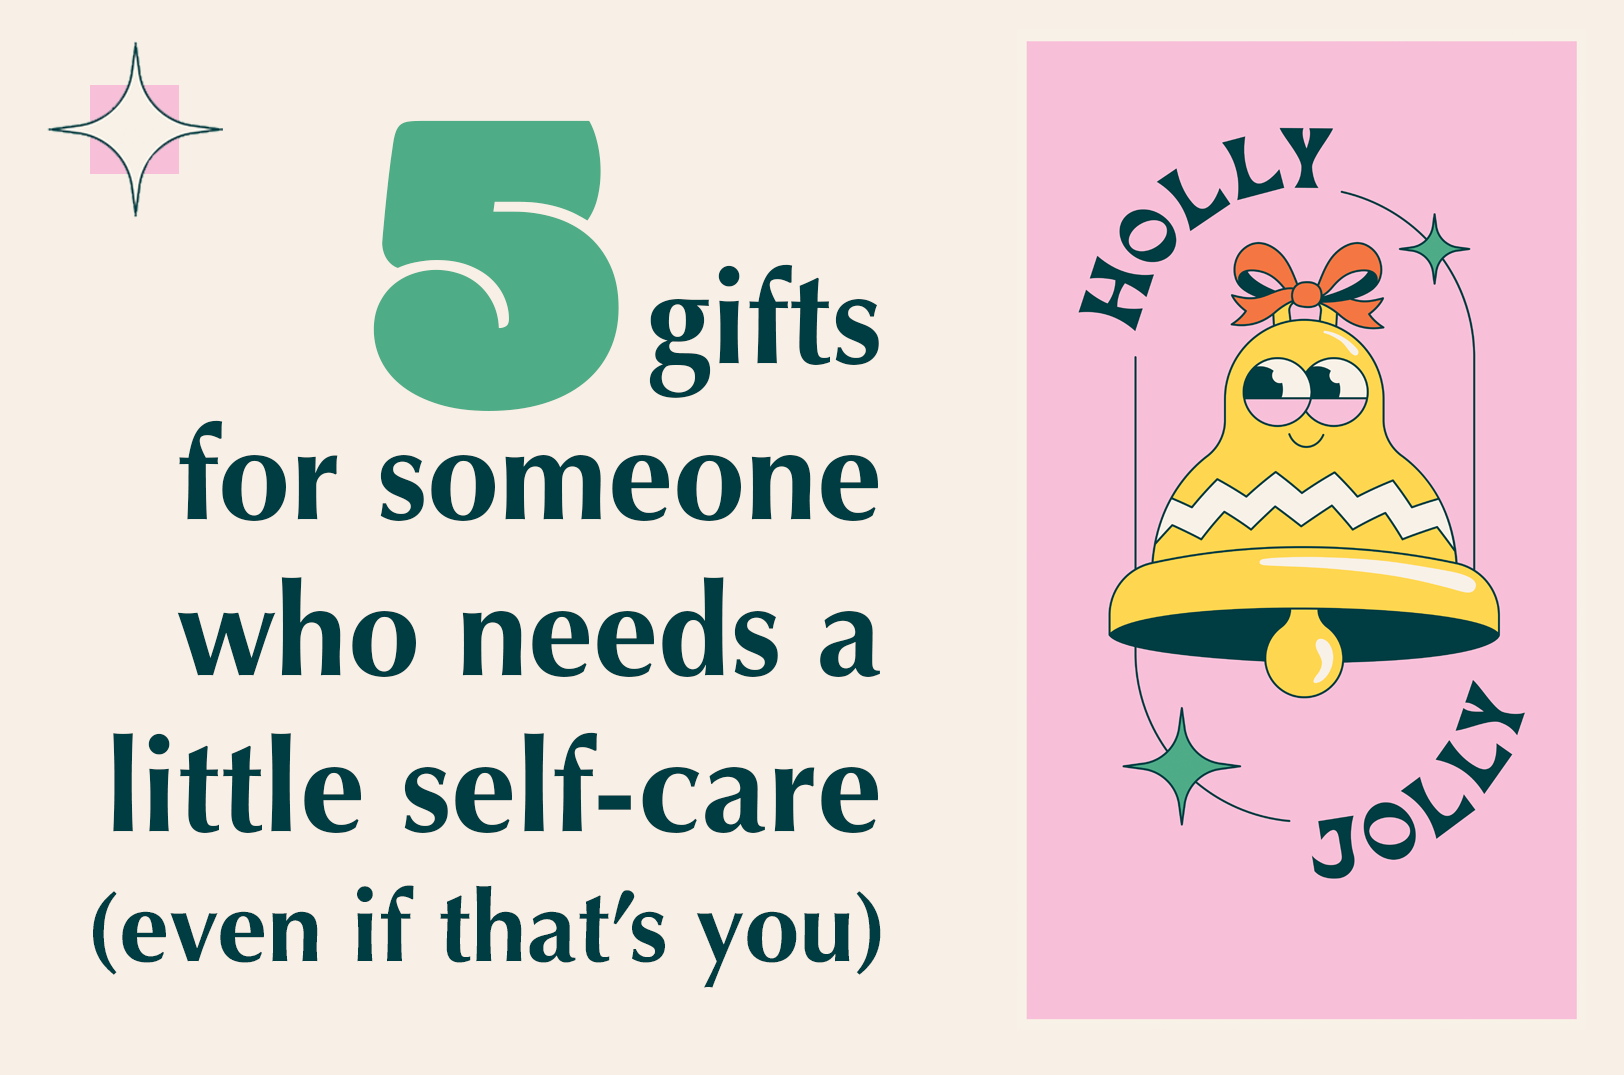 Shop Small: 5 gifts for someone who needs a little self-care — even if that’s you (KC Gift Guide)